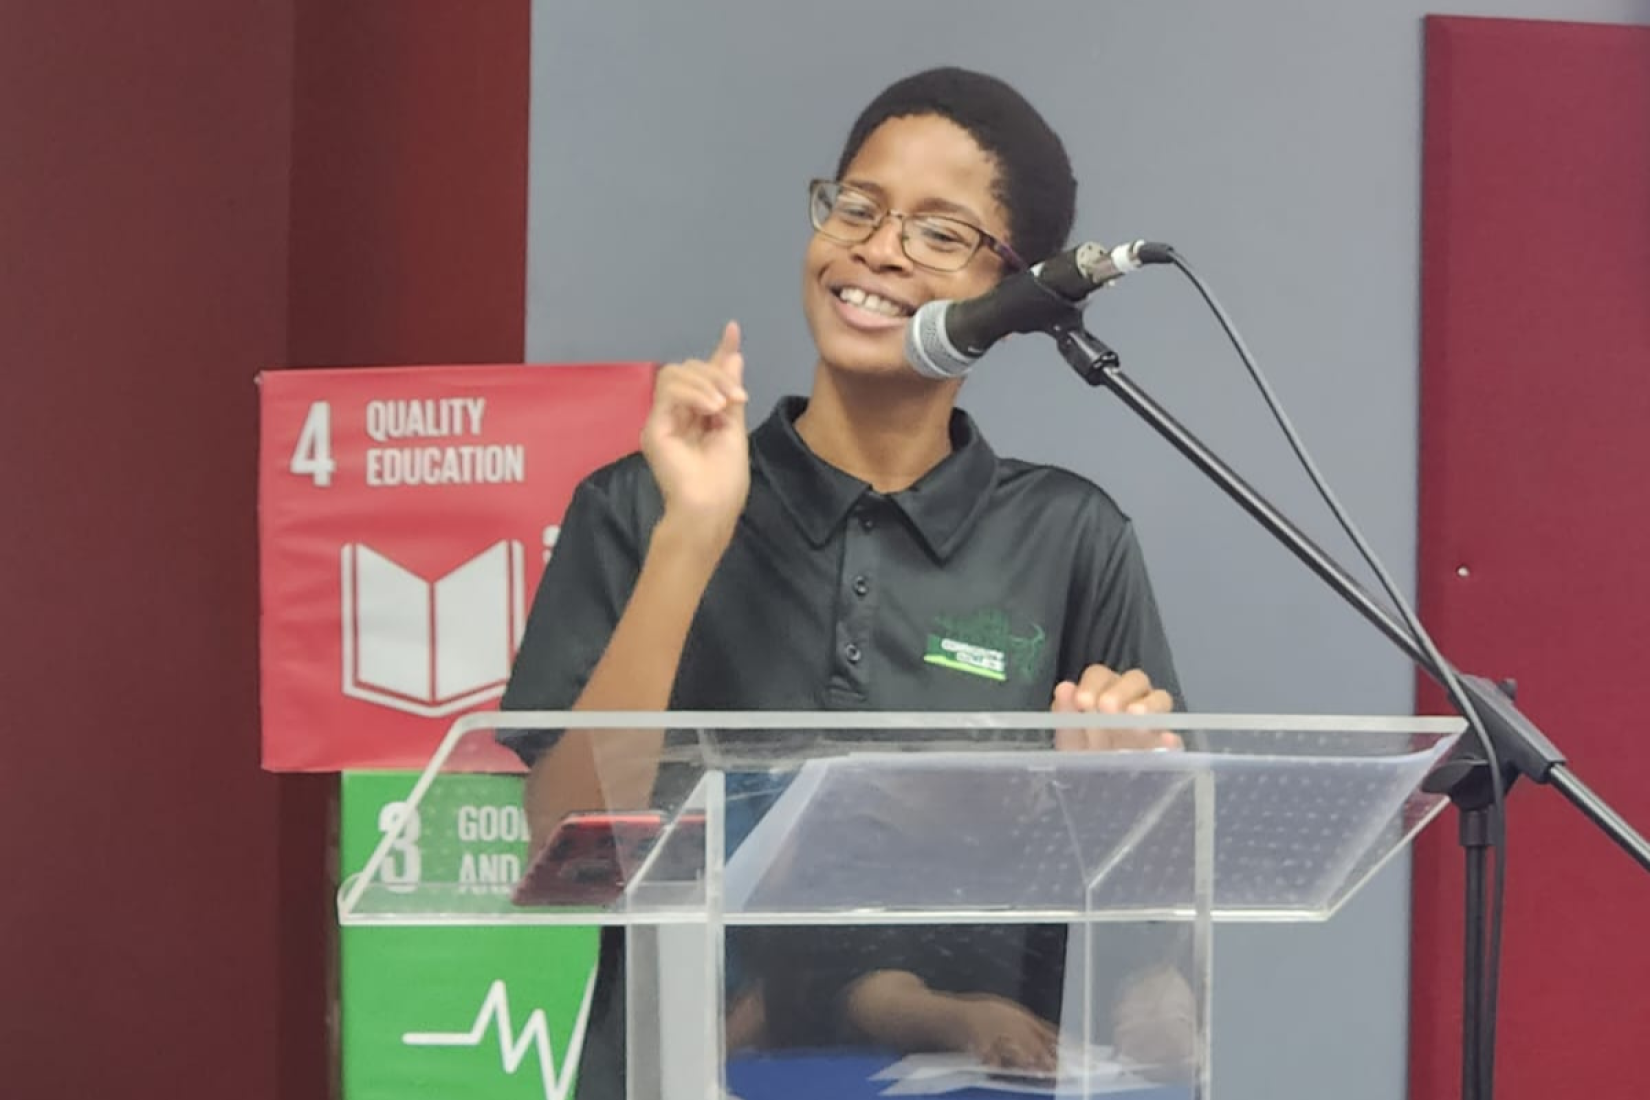 Shyne Savory was among the group of young persons who proposed the SDG debate topic